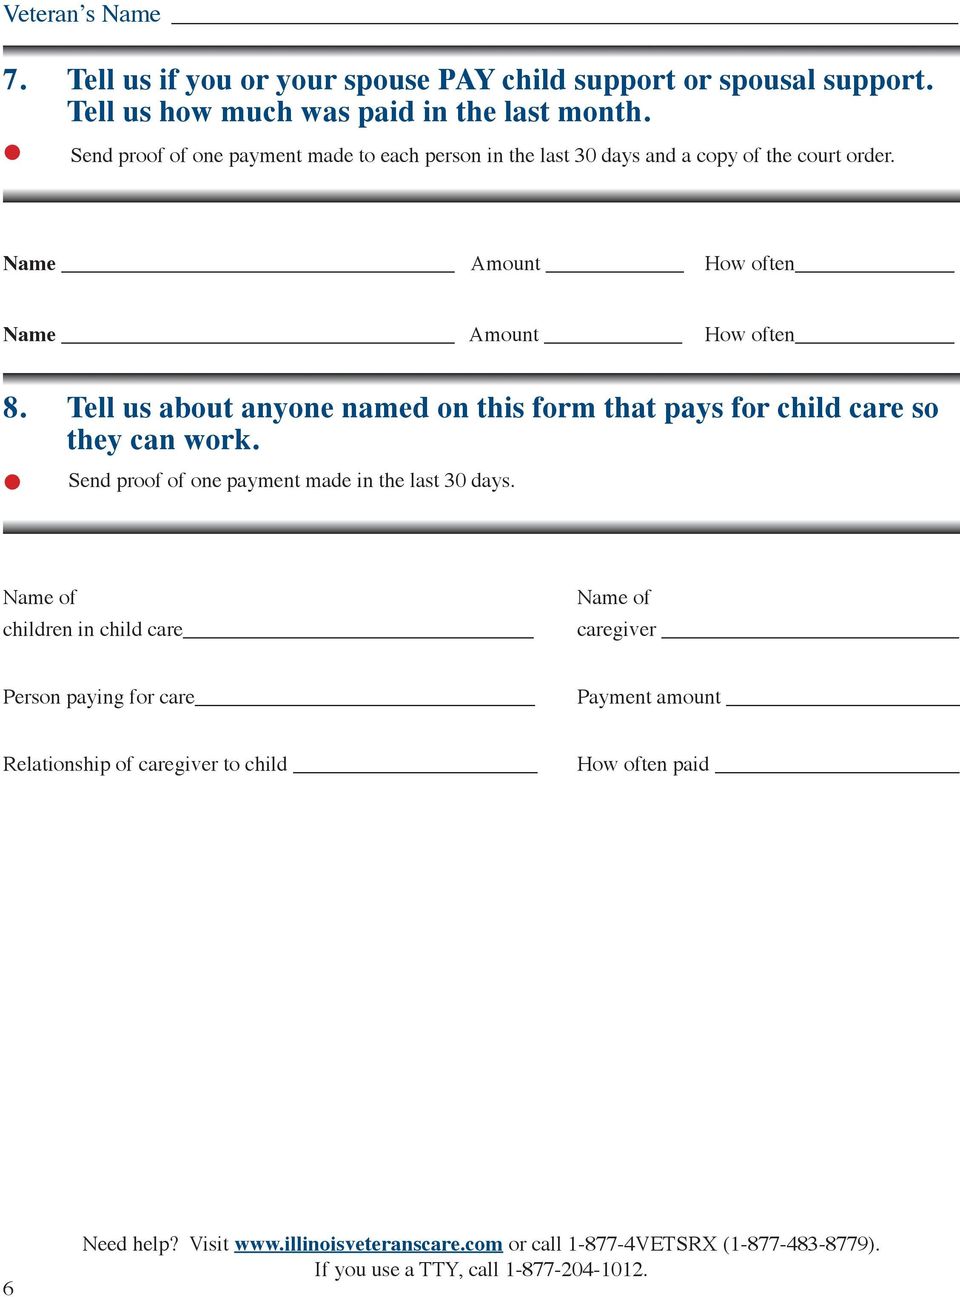 Tell us about anyone named on this form that pays for child care so they can work. Send proof of one payment made in the last 30 days.